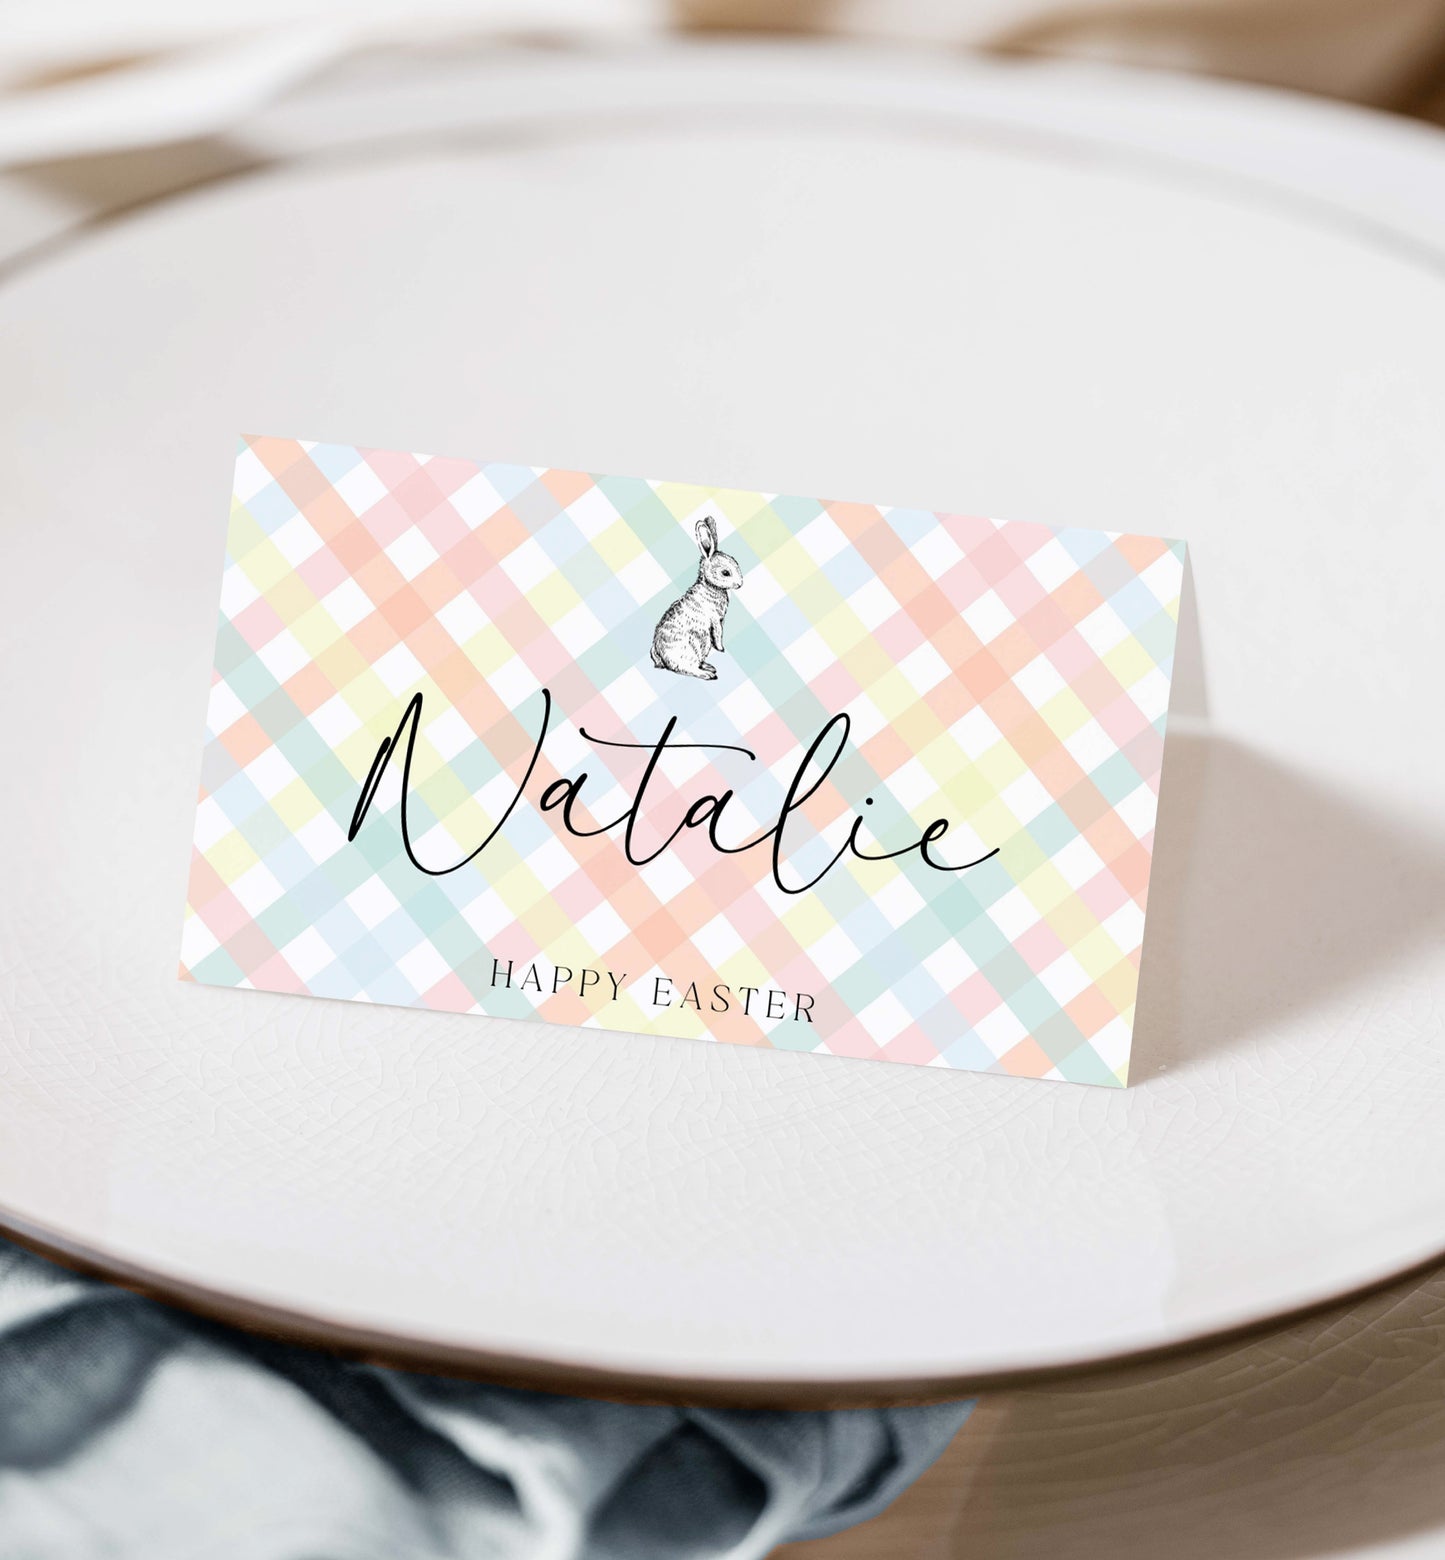 Printable Tent and Flat Style Pace Cards, Multi Gingham, Easter Brunch Place Cards, Printable Place Setting Cards, Easter Lunch Name Cards